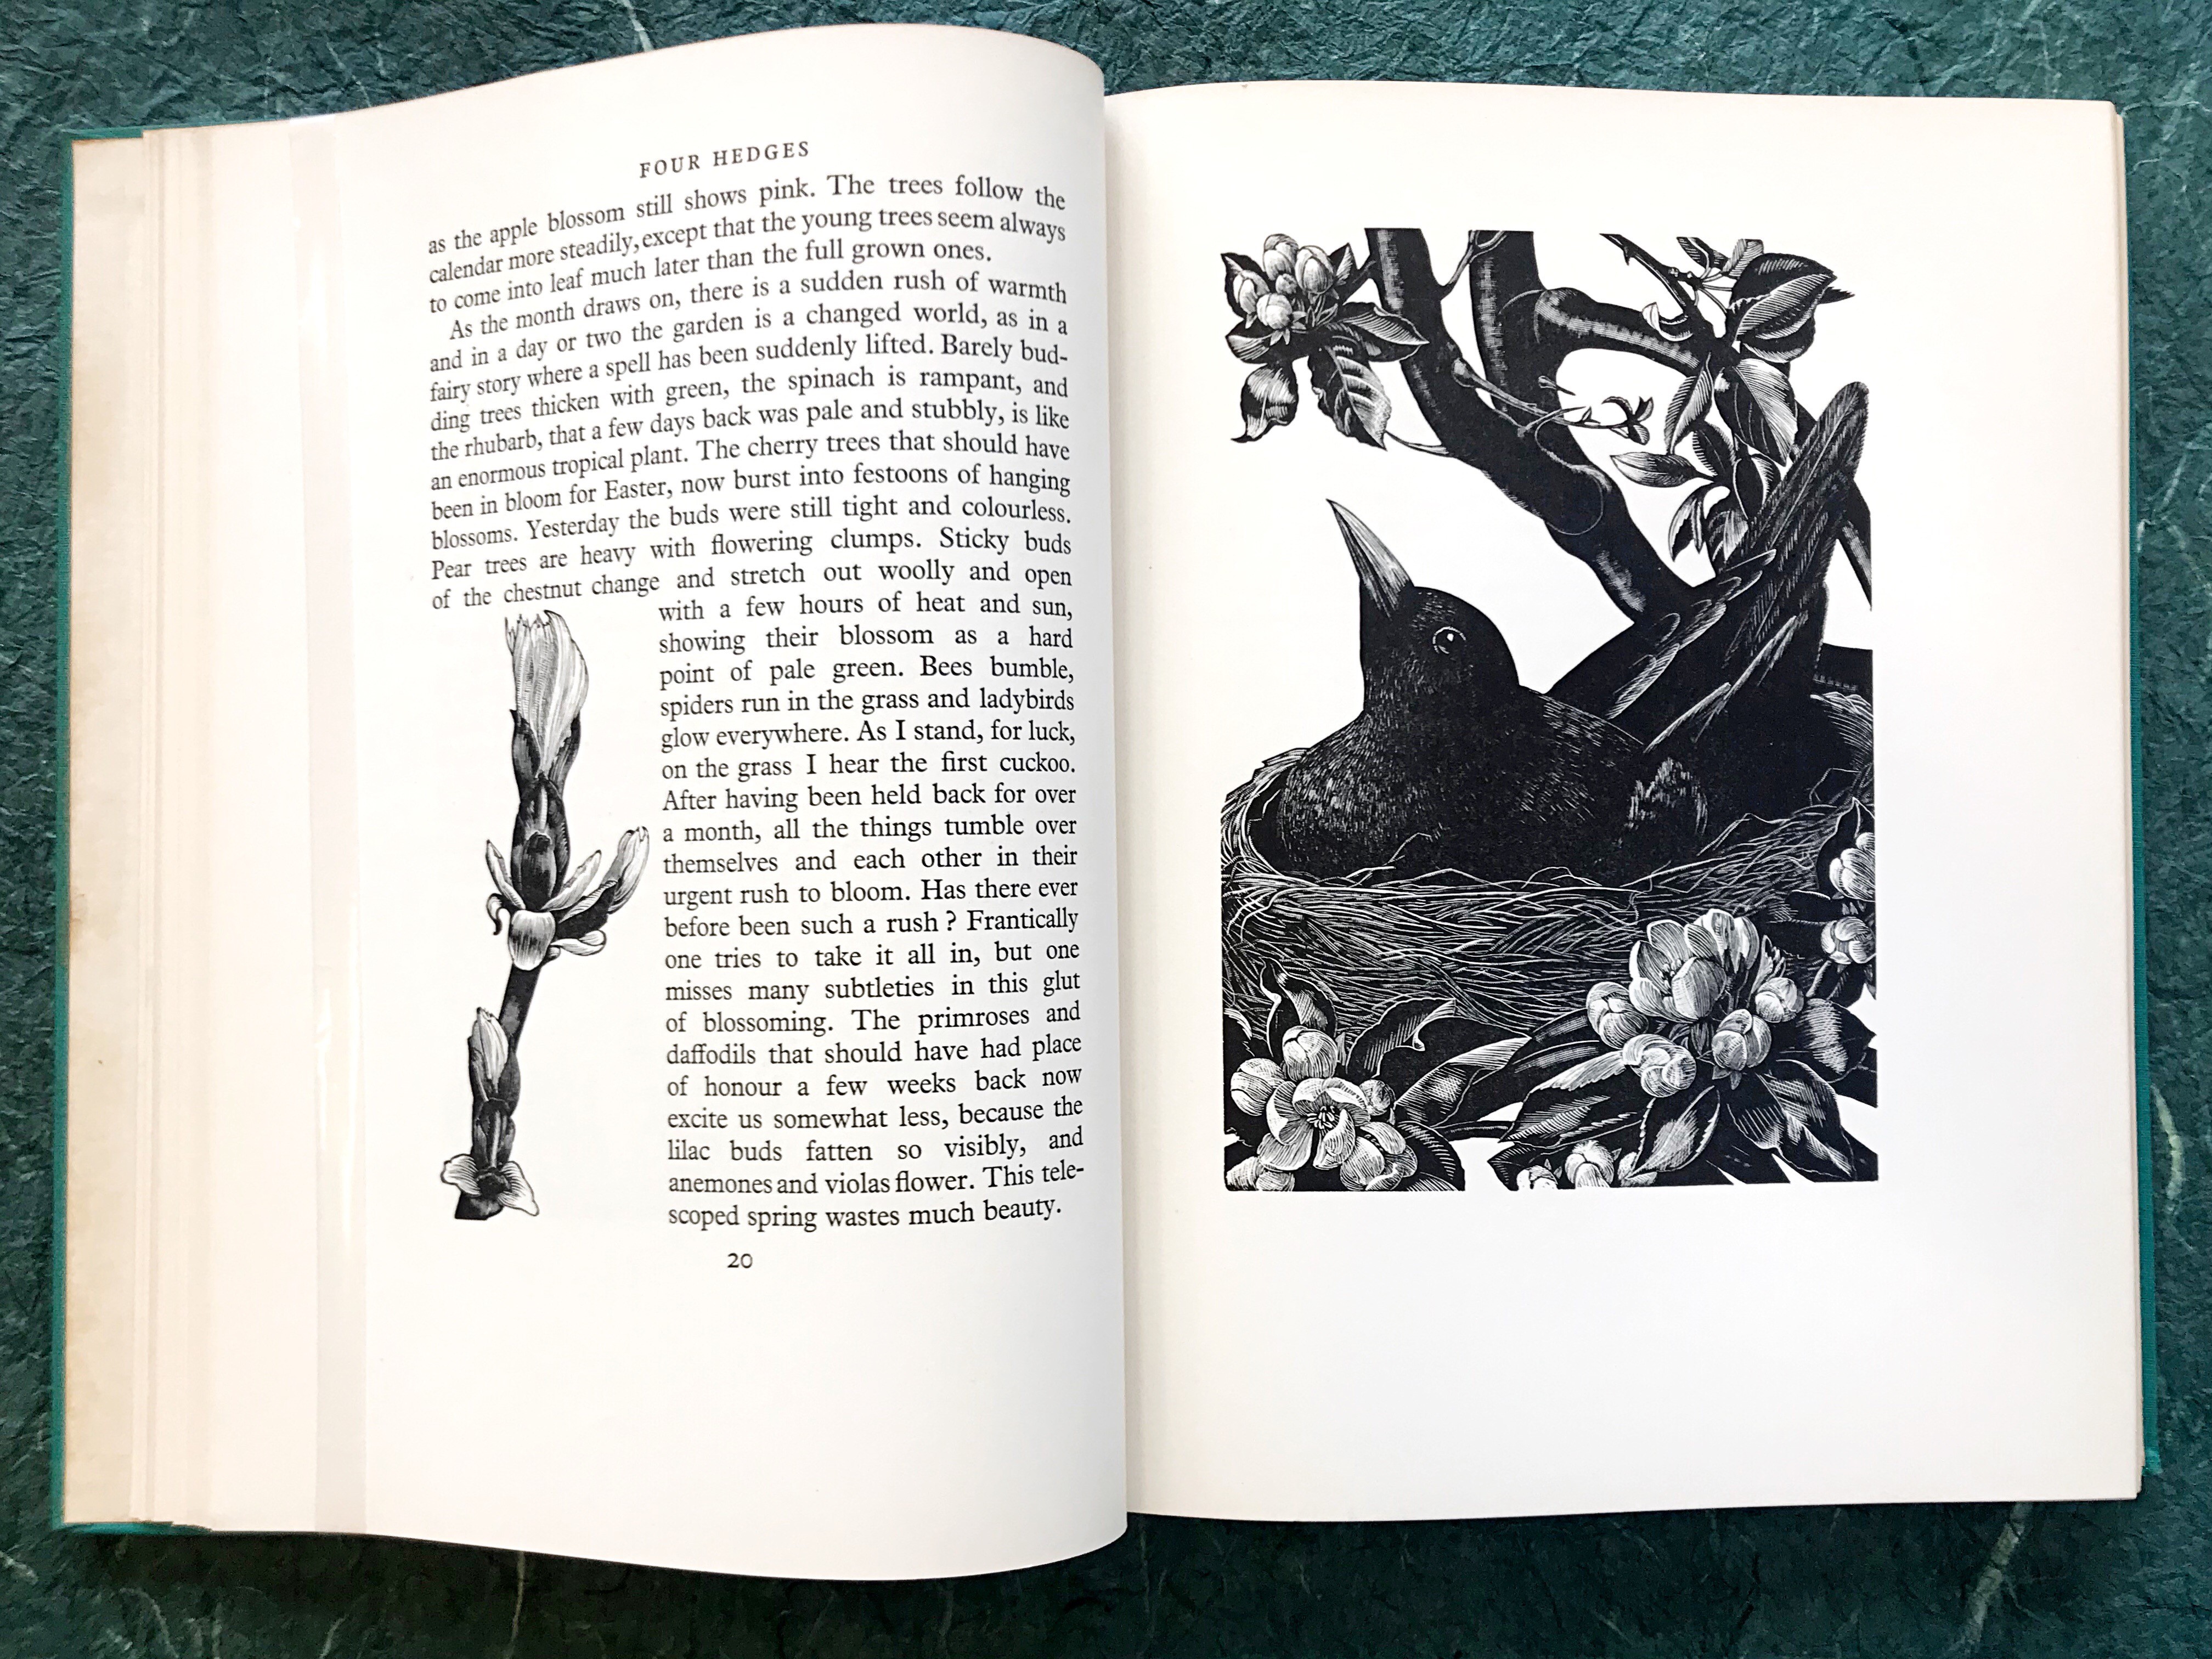 page from The Farmer’s Year by Clare Leighton with an illustration of a bird's nest